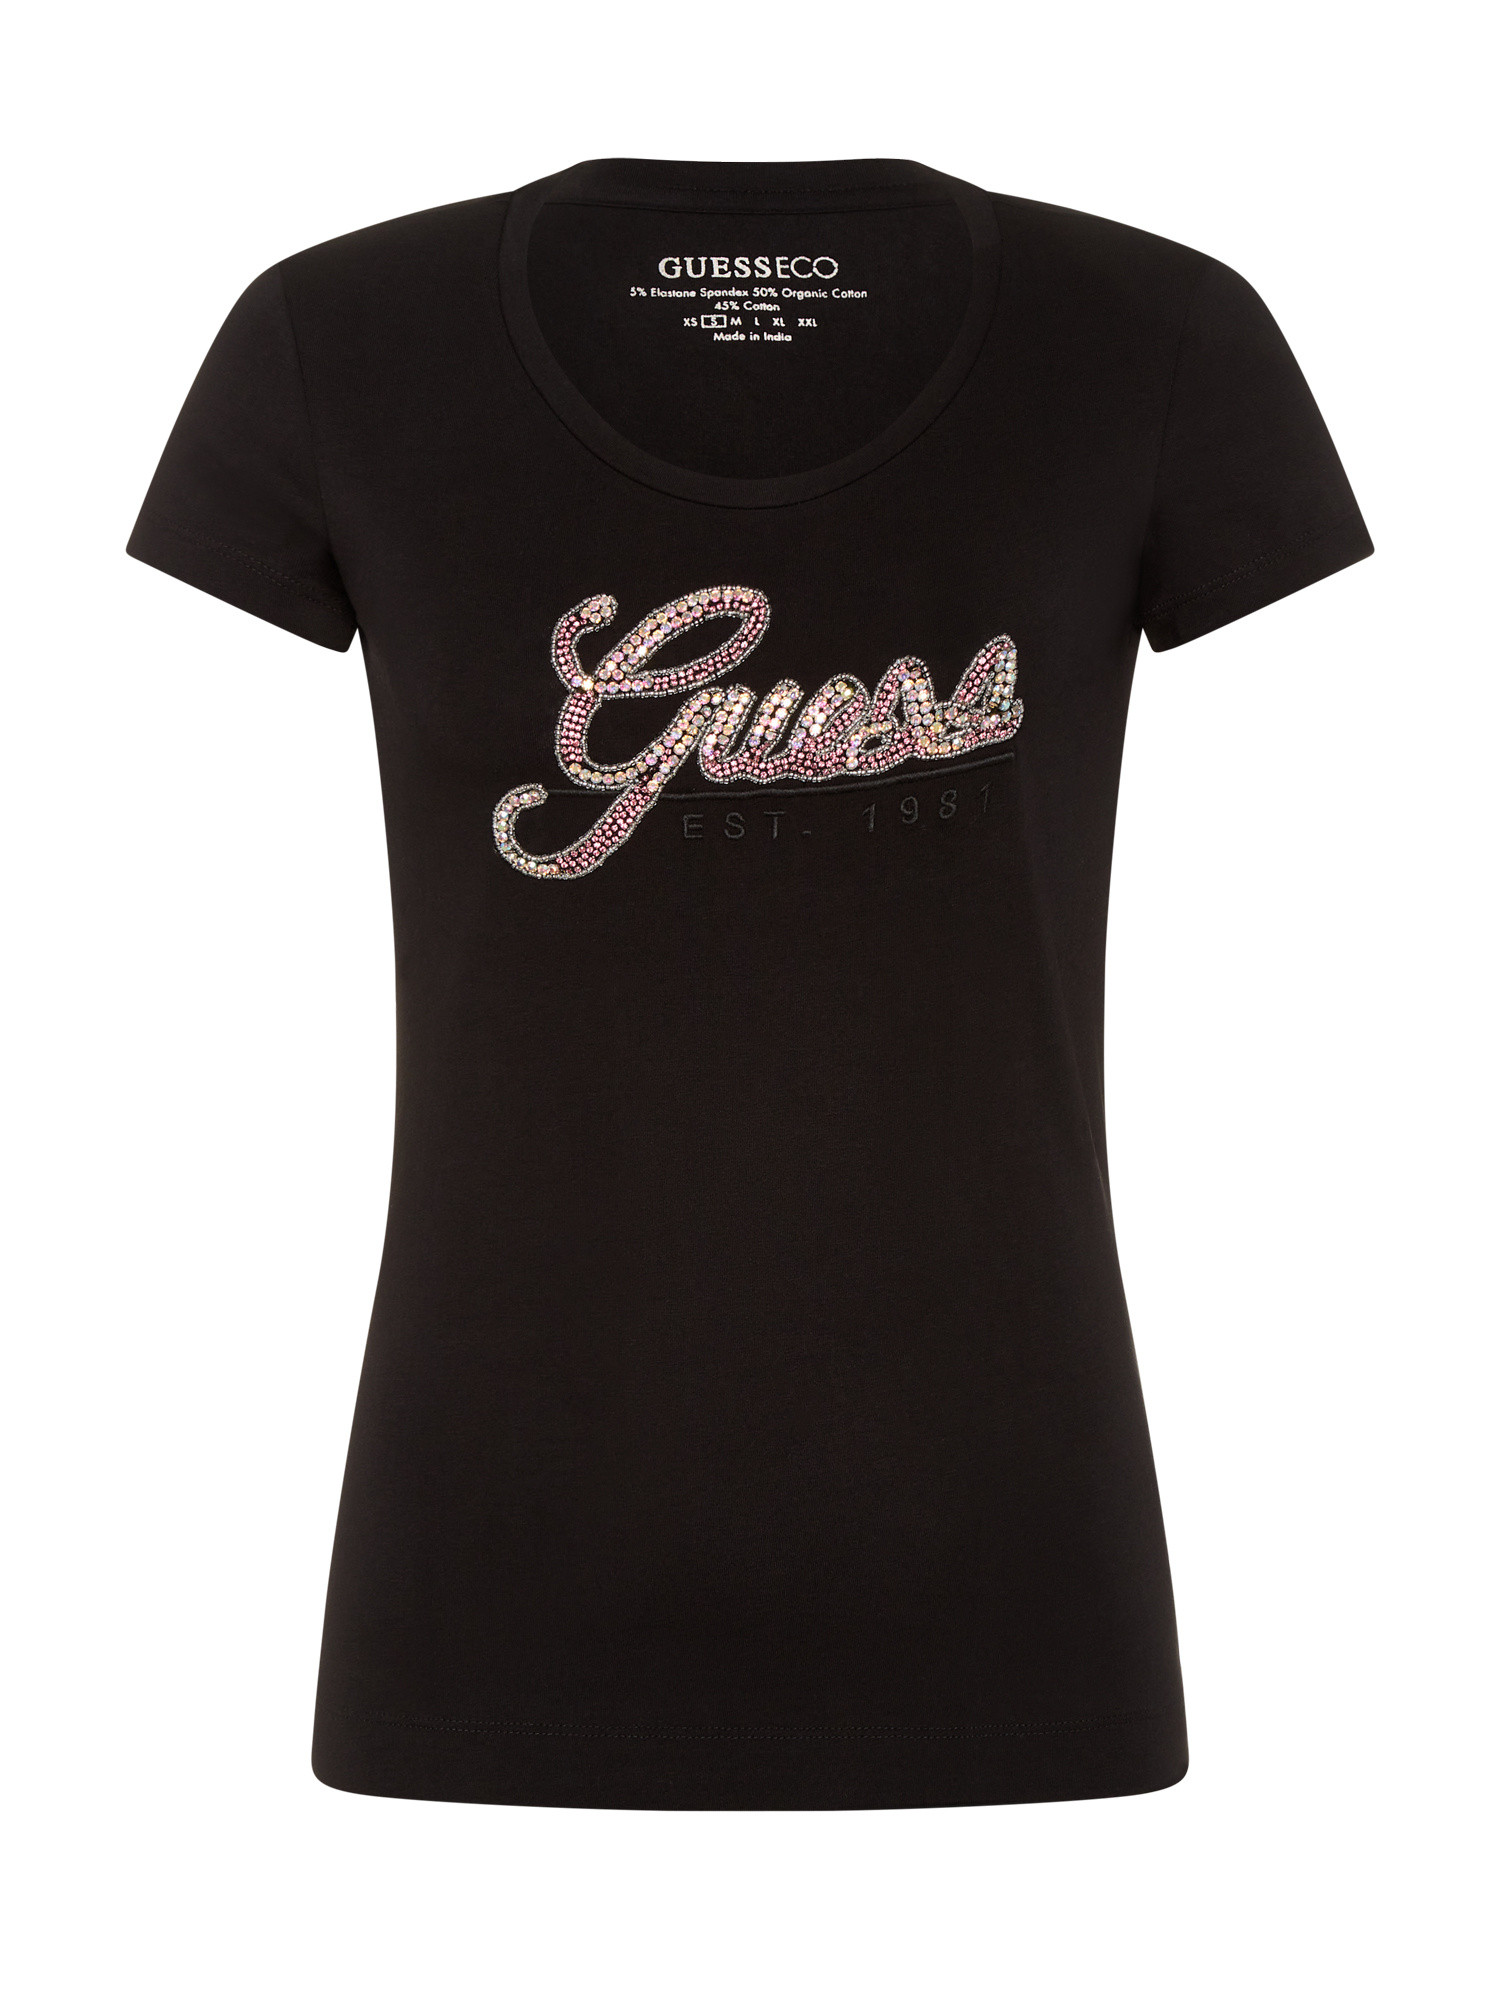 Guess - T-shirt with logo, Black, large image number 0